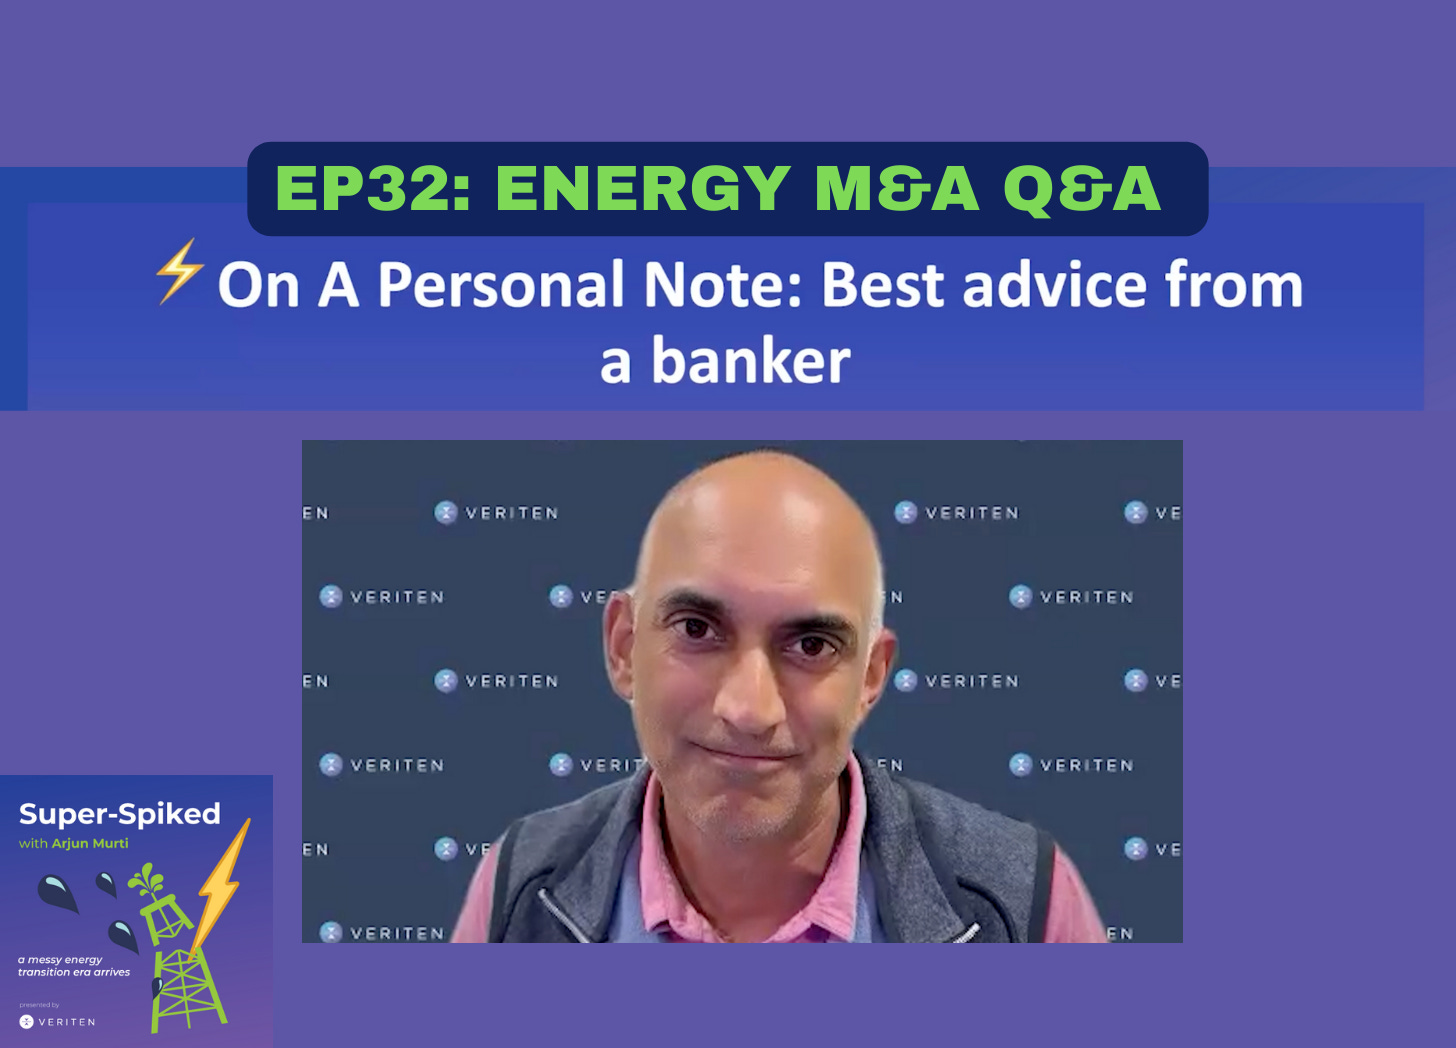 Super-Spiked Videopods (EP32): Energy M&A Q&A